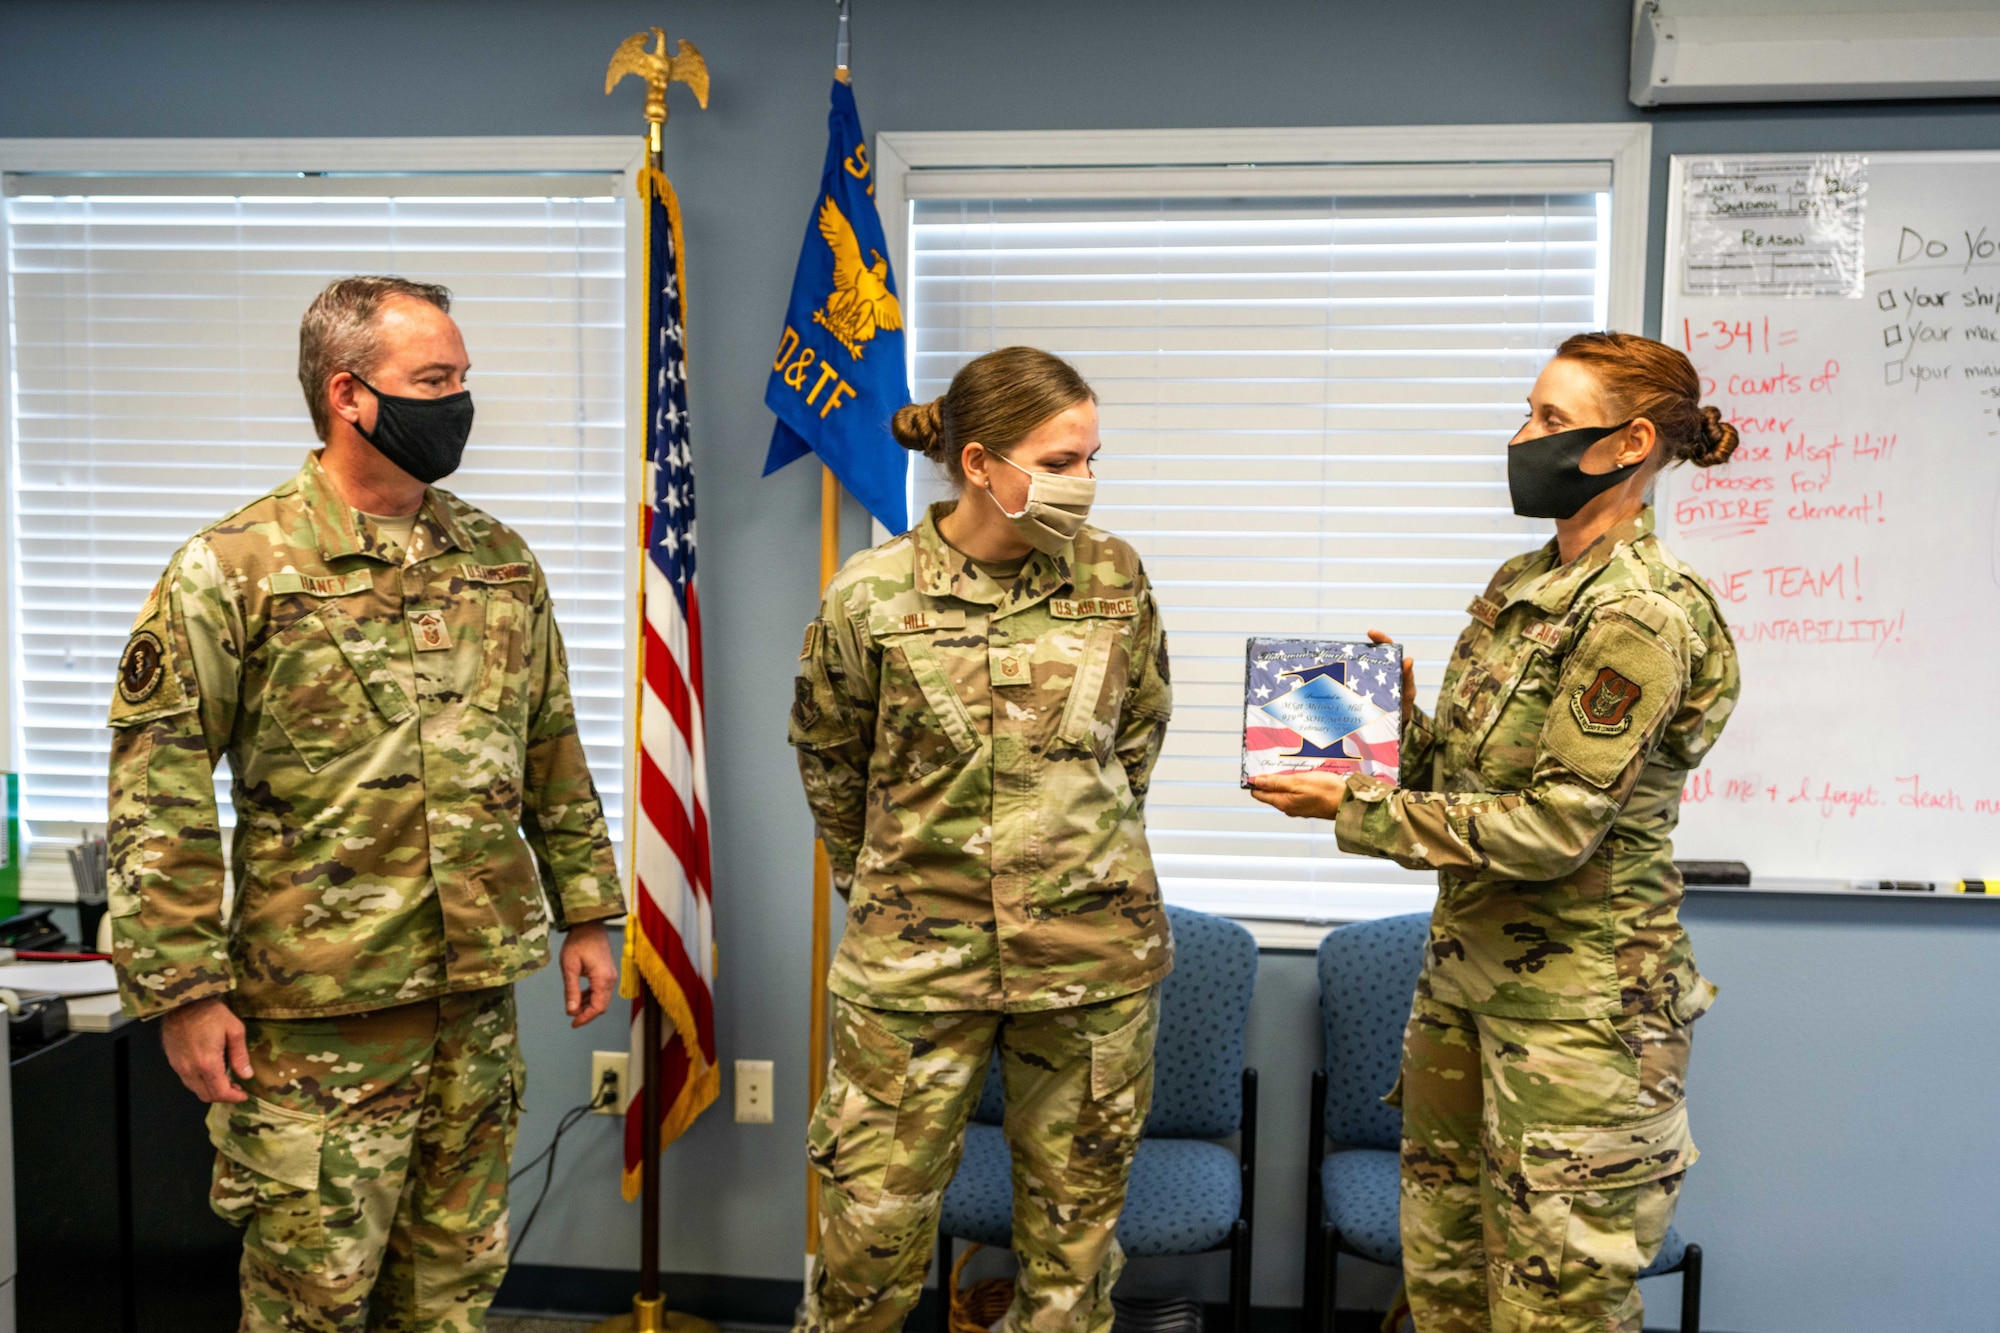 Airman receives award from two first sergeants.